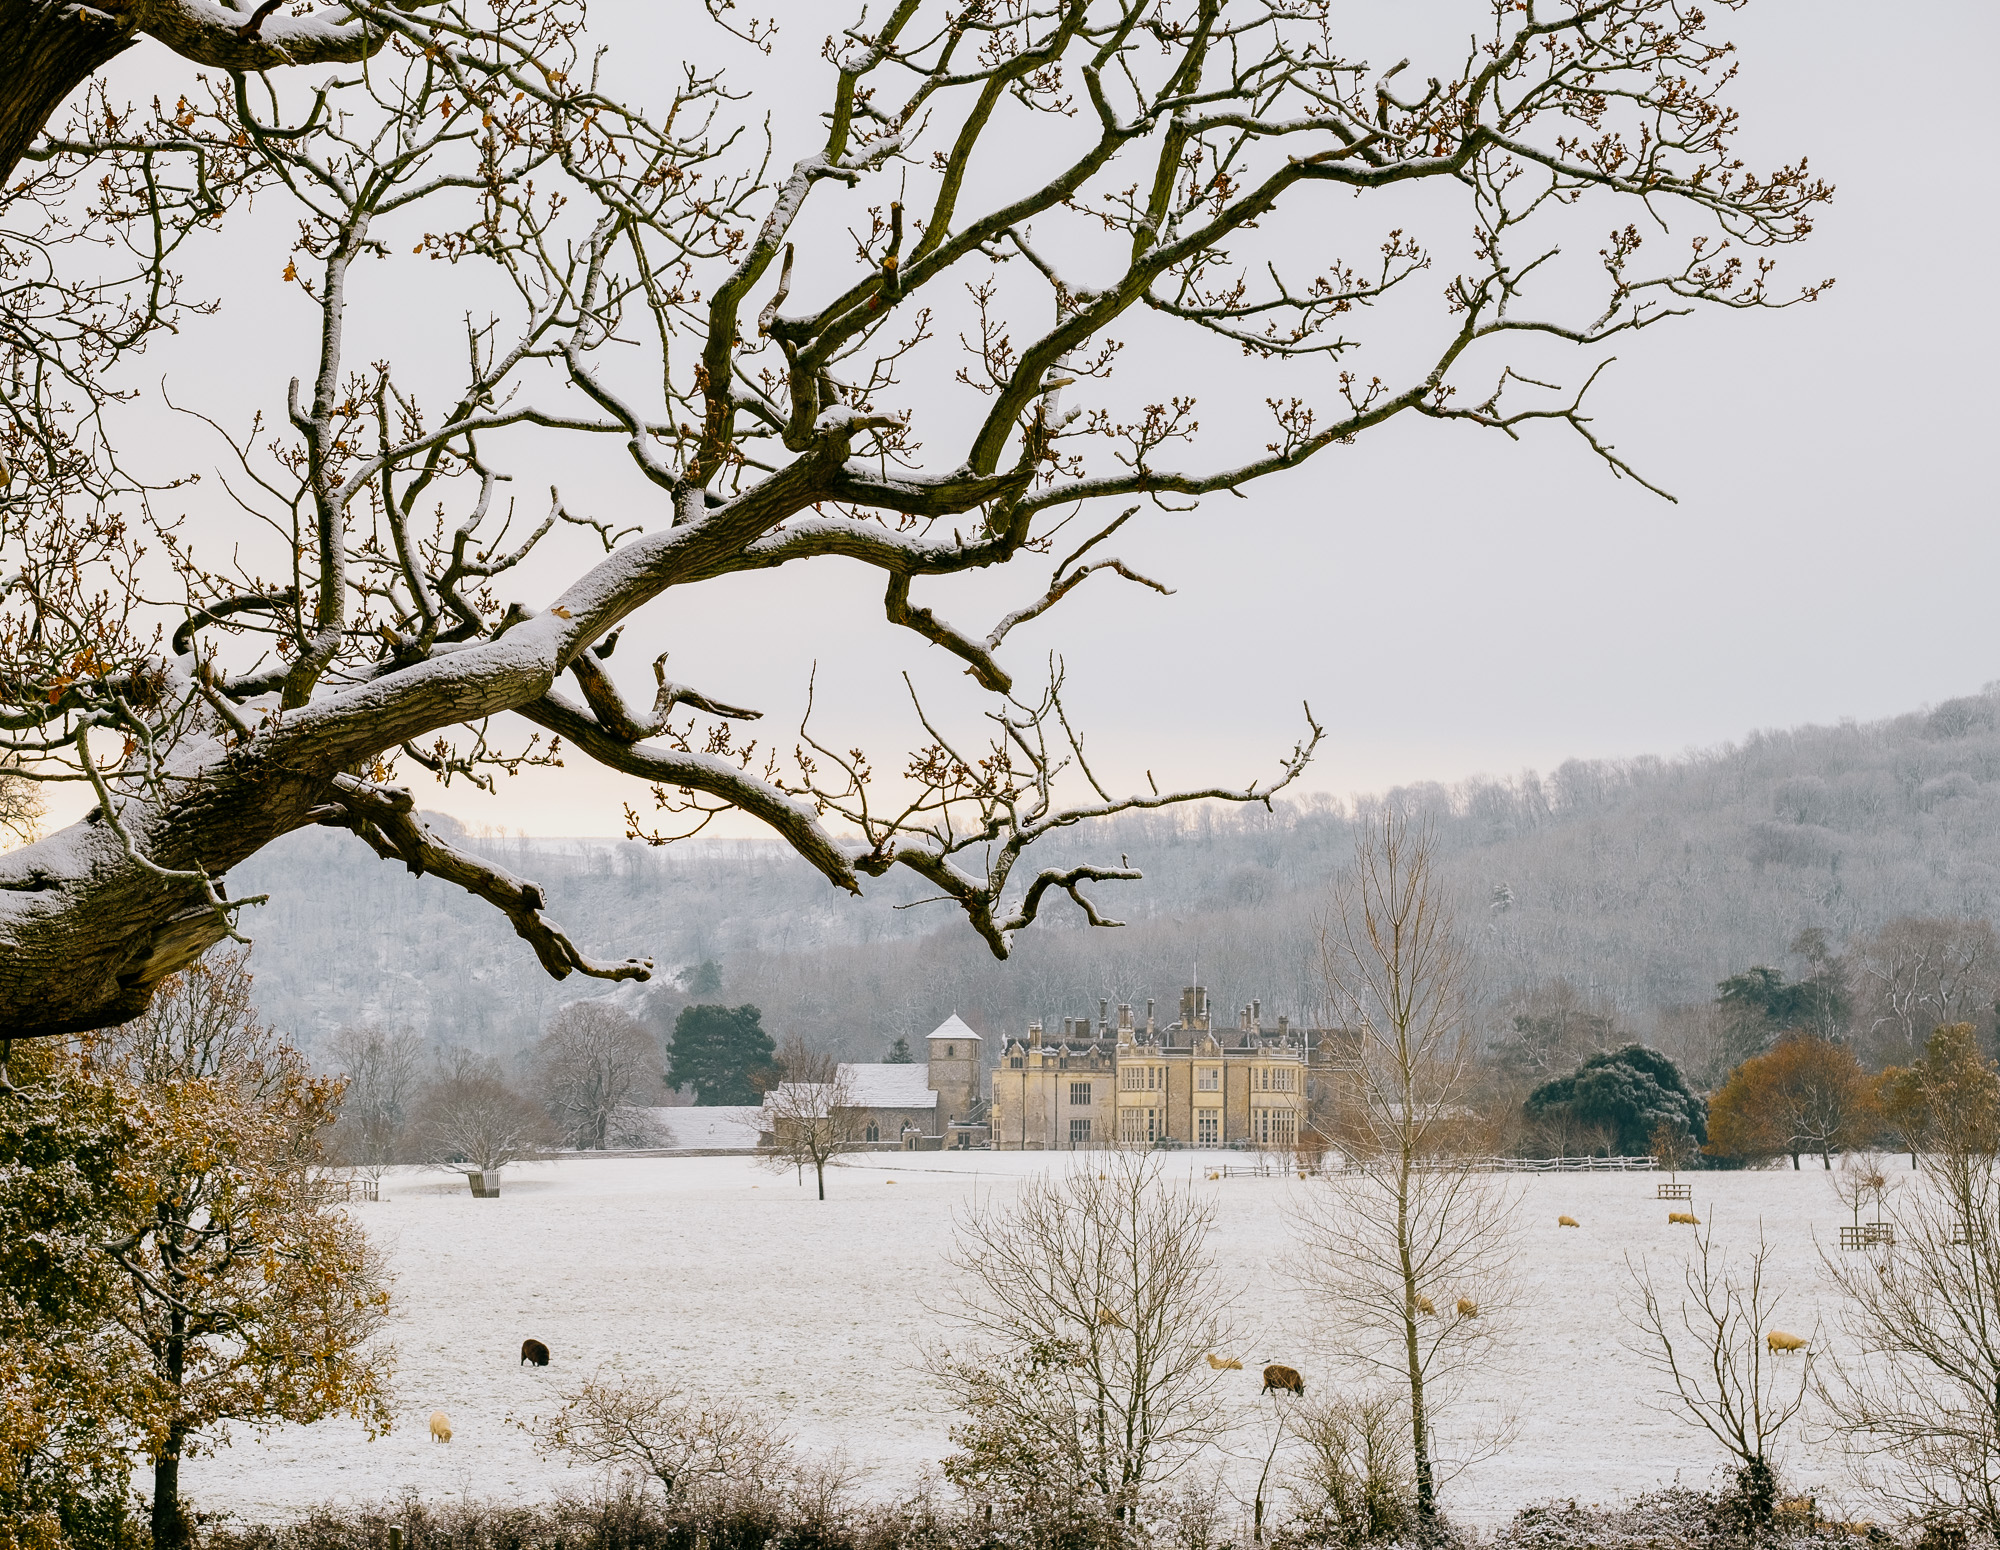 Wiston House in the snow